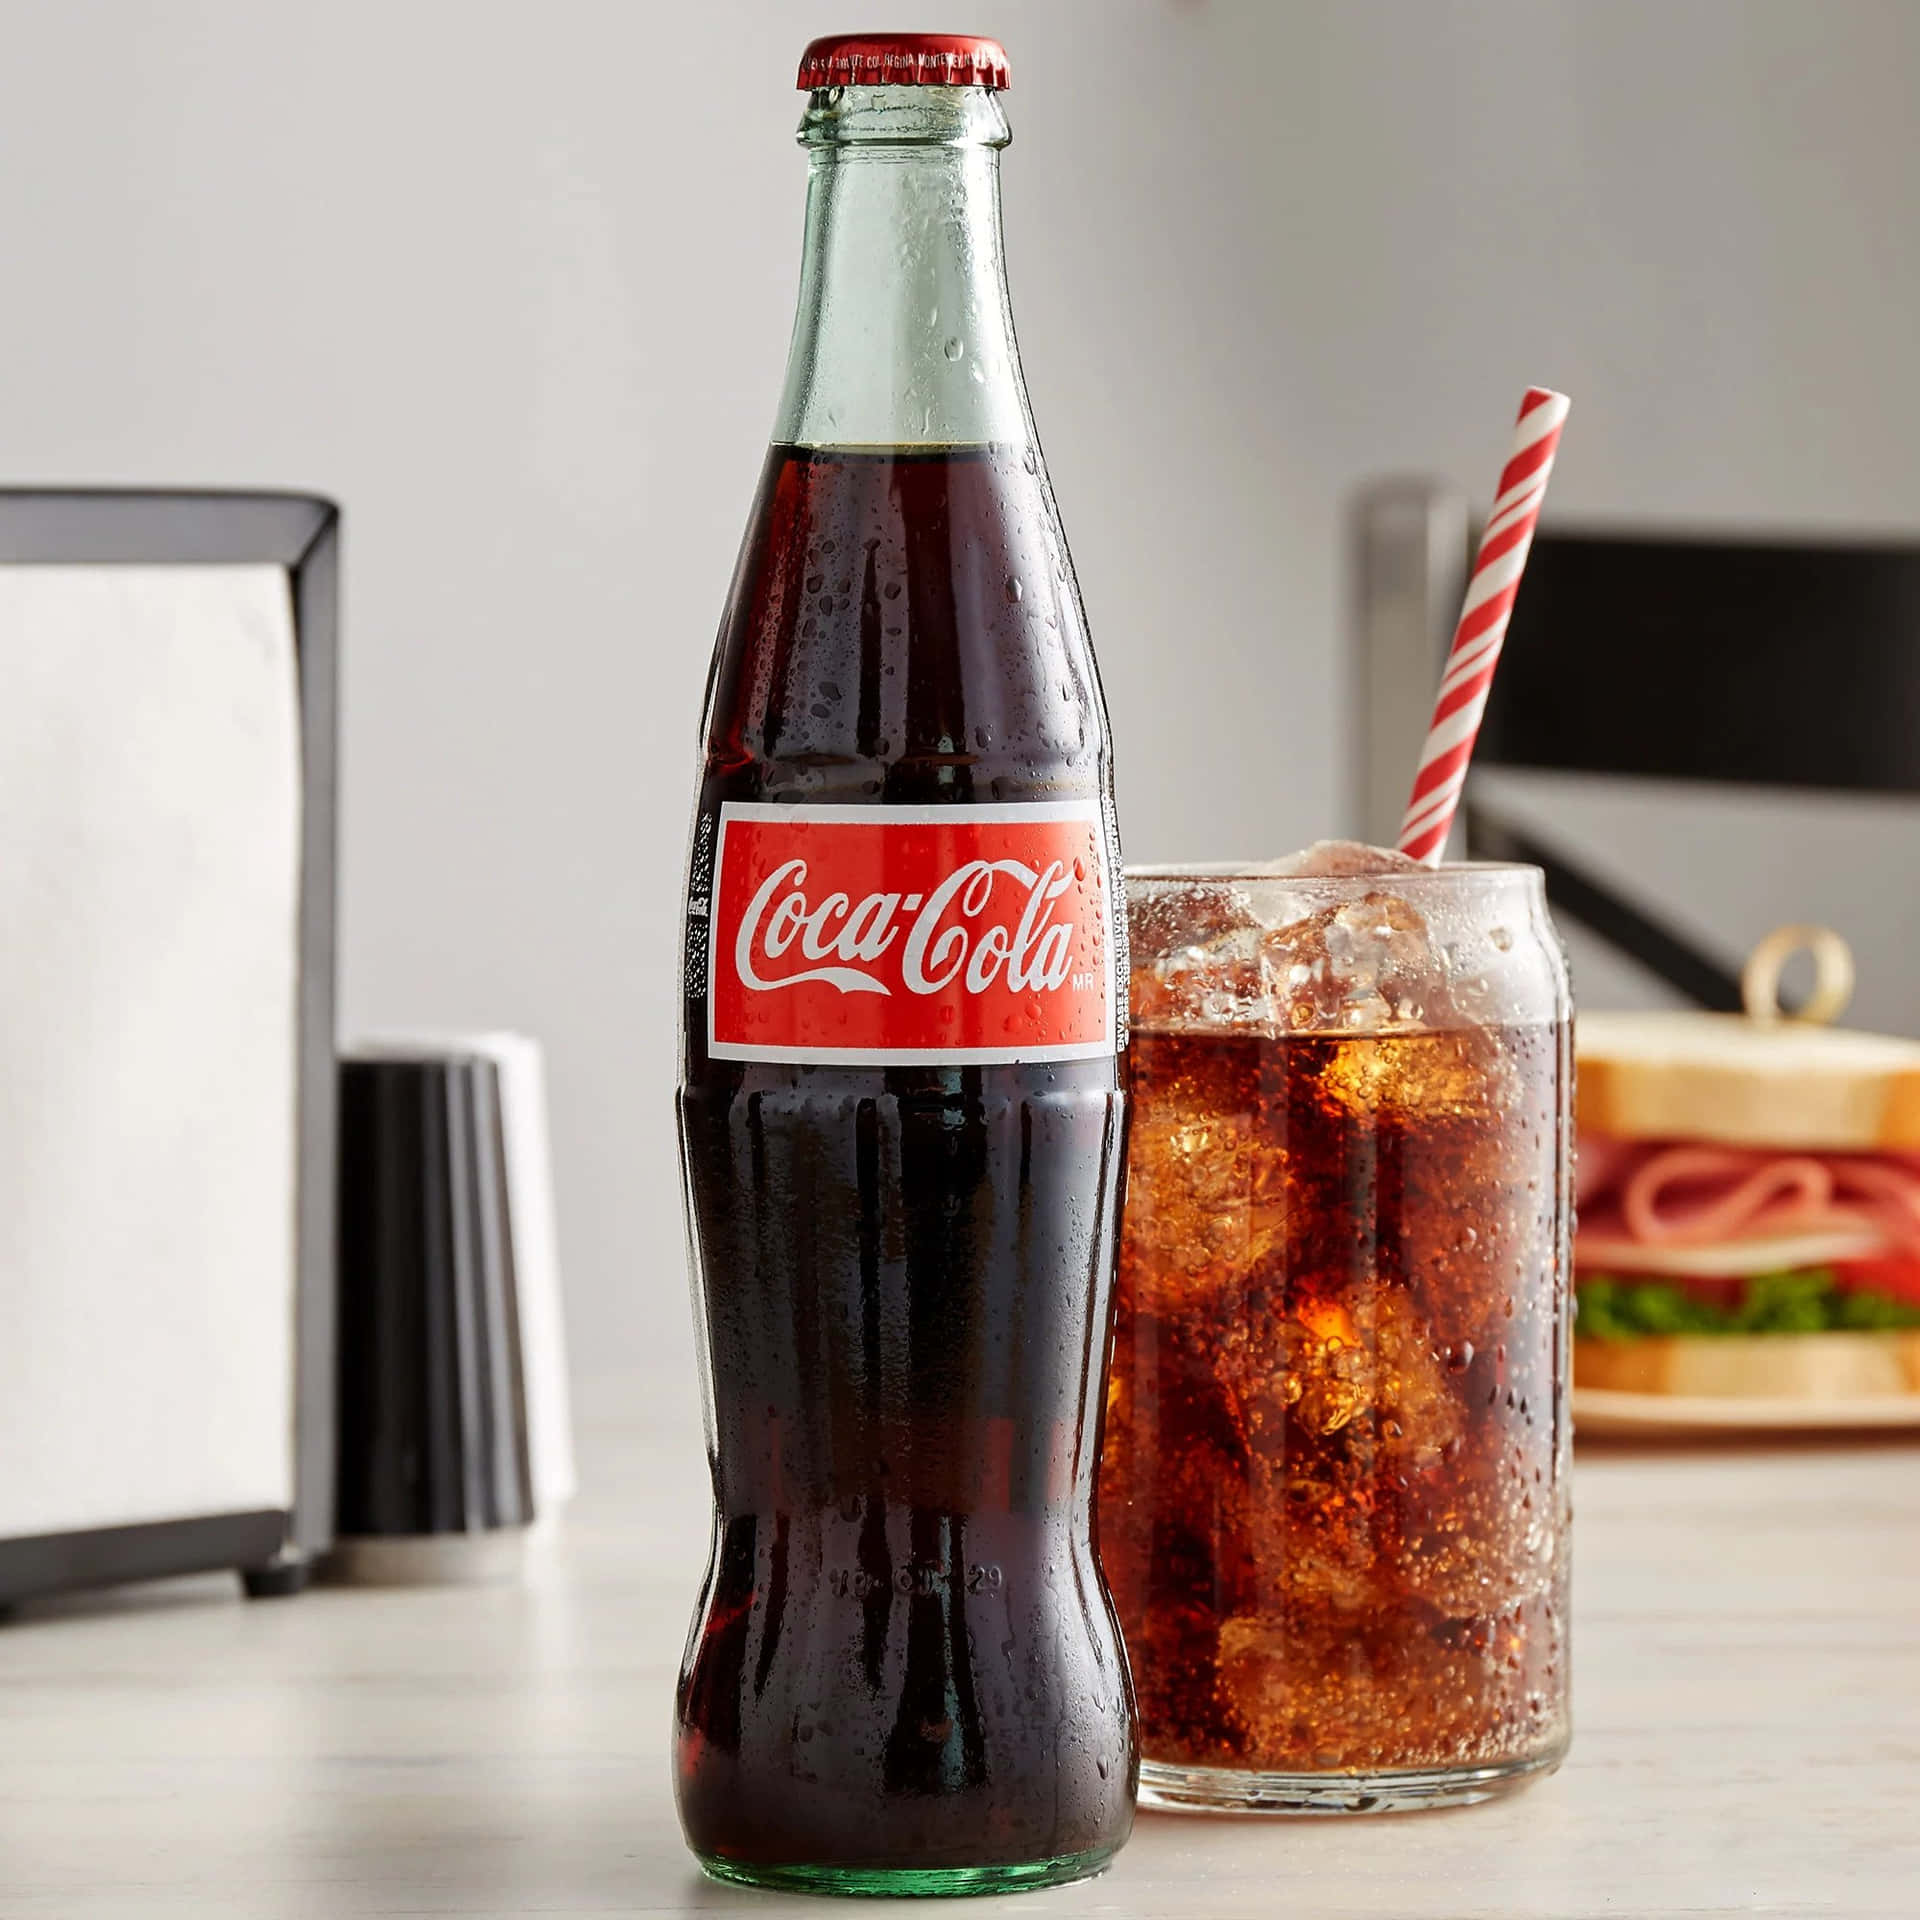 A Classic Refreshment Moment: Enjoying a Chilled Bottle of Coca Cola